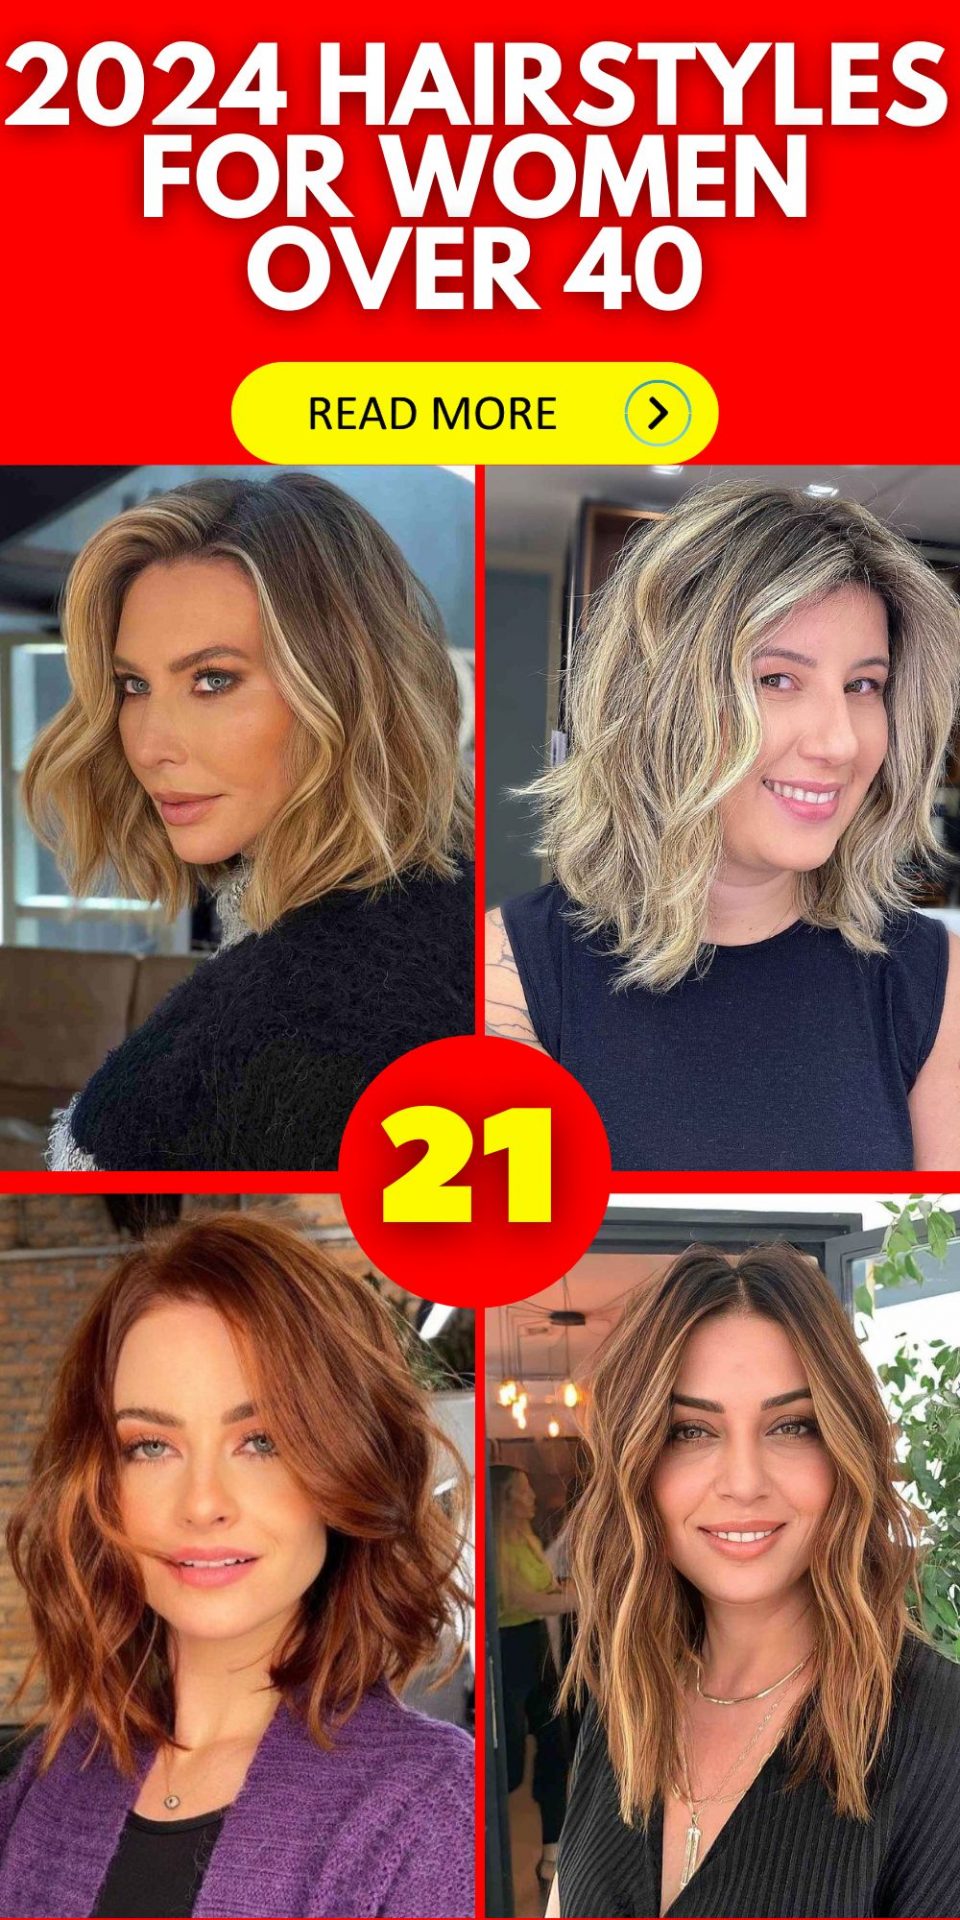 Elevate Your Style in 2024 Women Over 40 Hairstyles Short, Medium